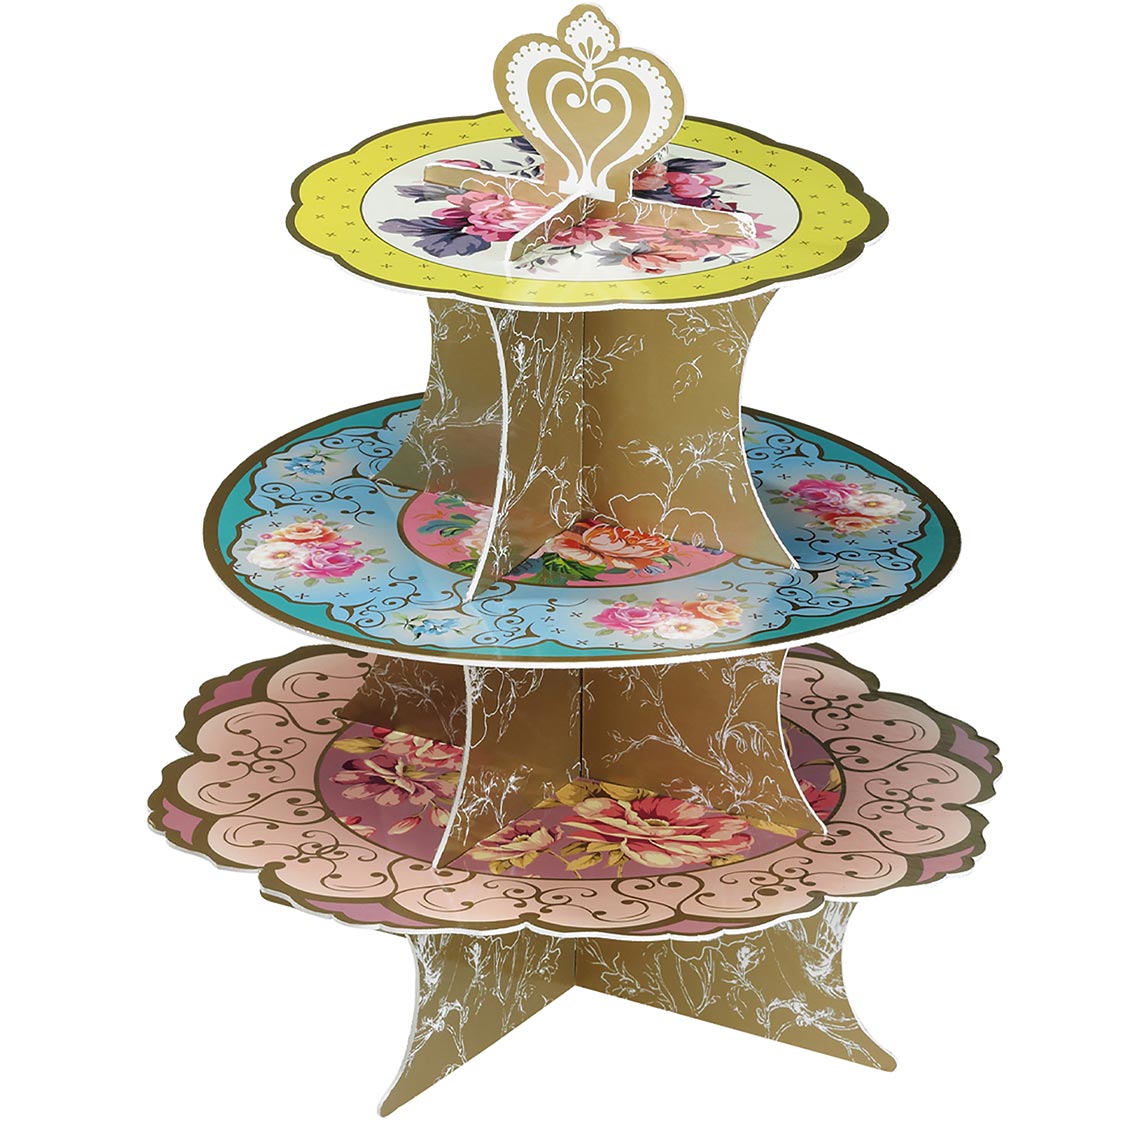 Talking Tables Floral 3 Tier Cardboard Cake Stand RRP 15 CLEARANCE XL 9.99